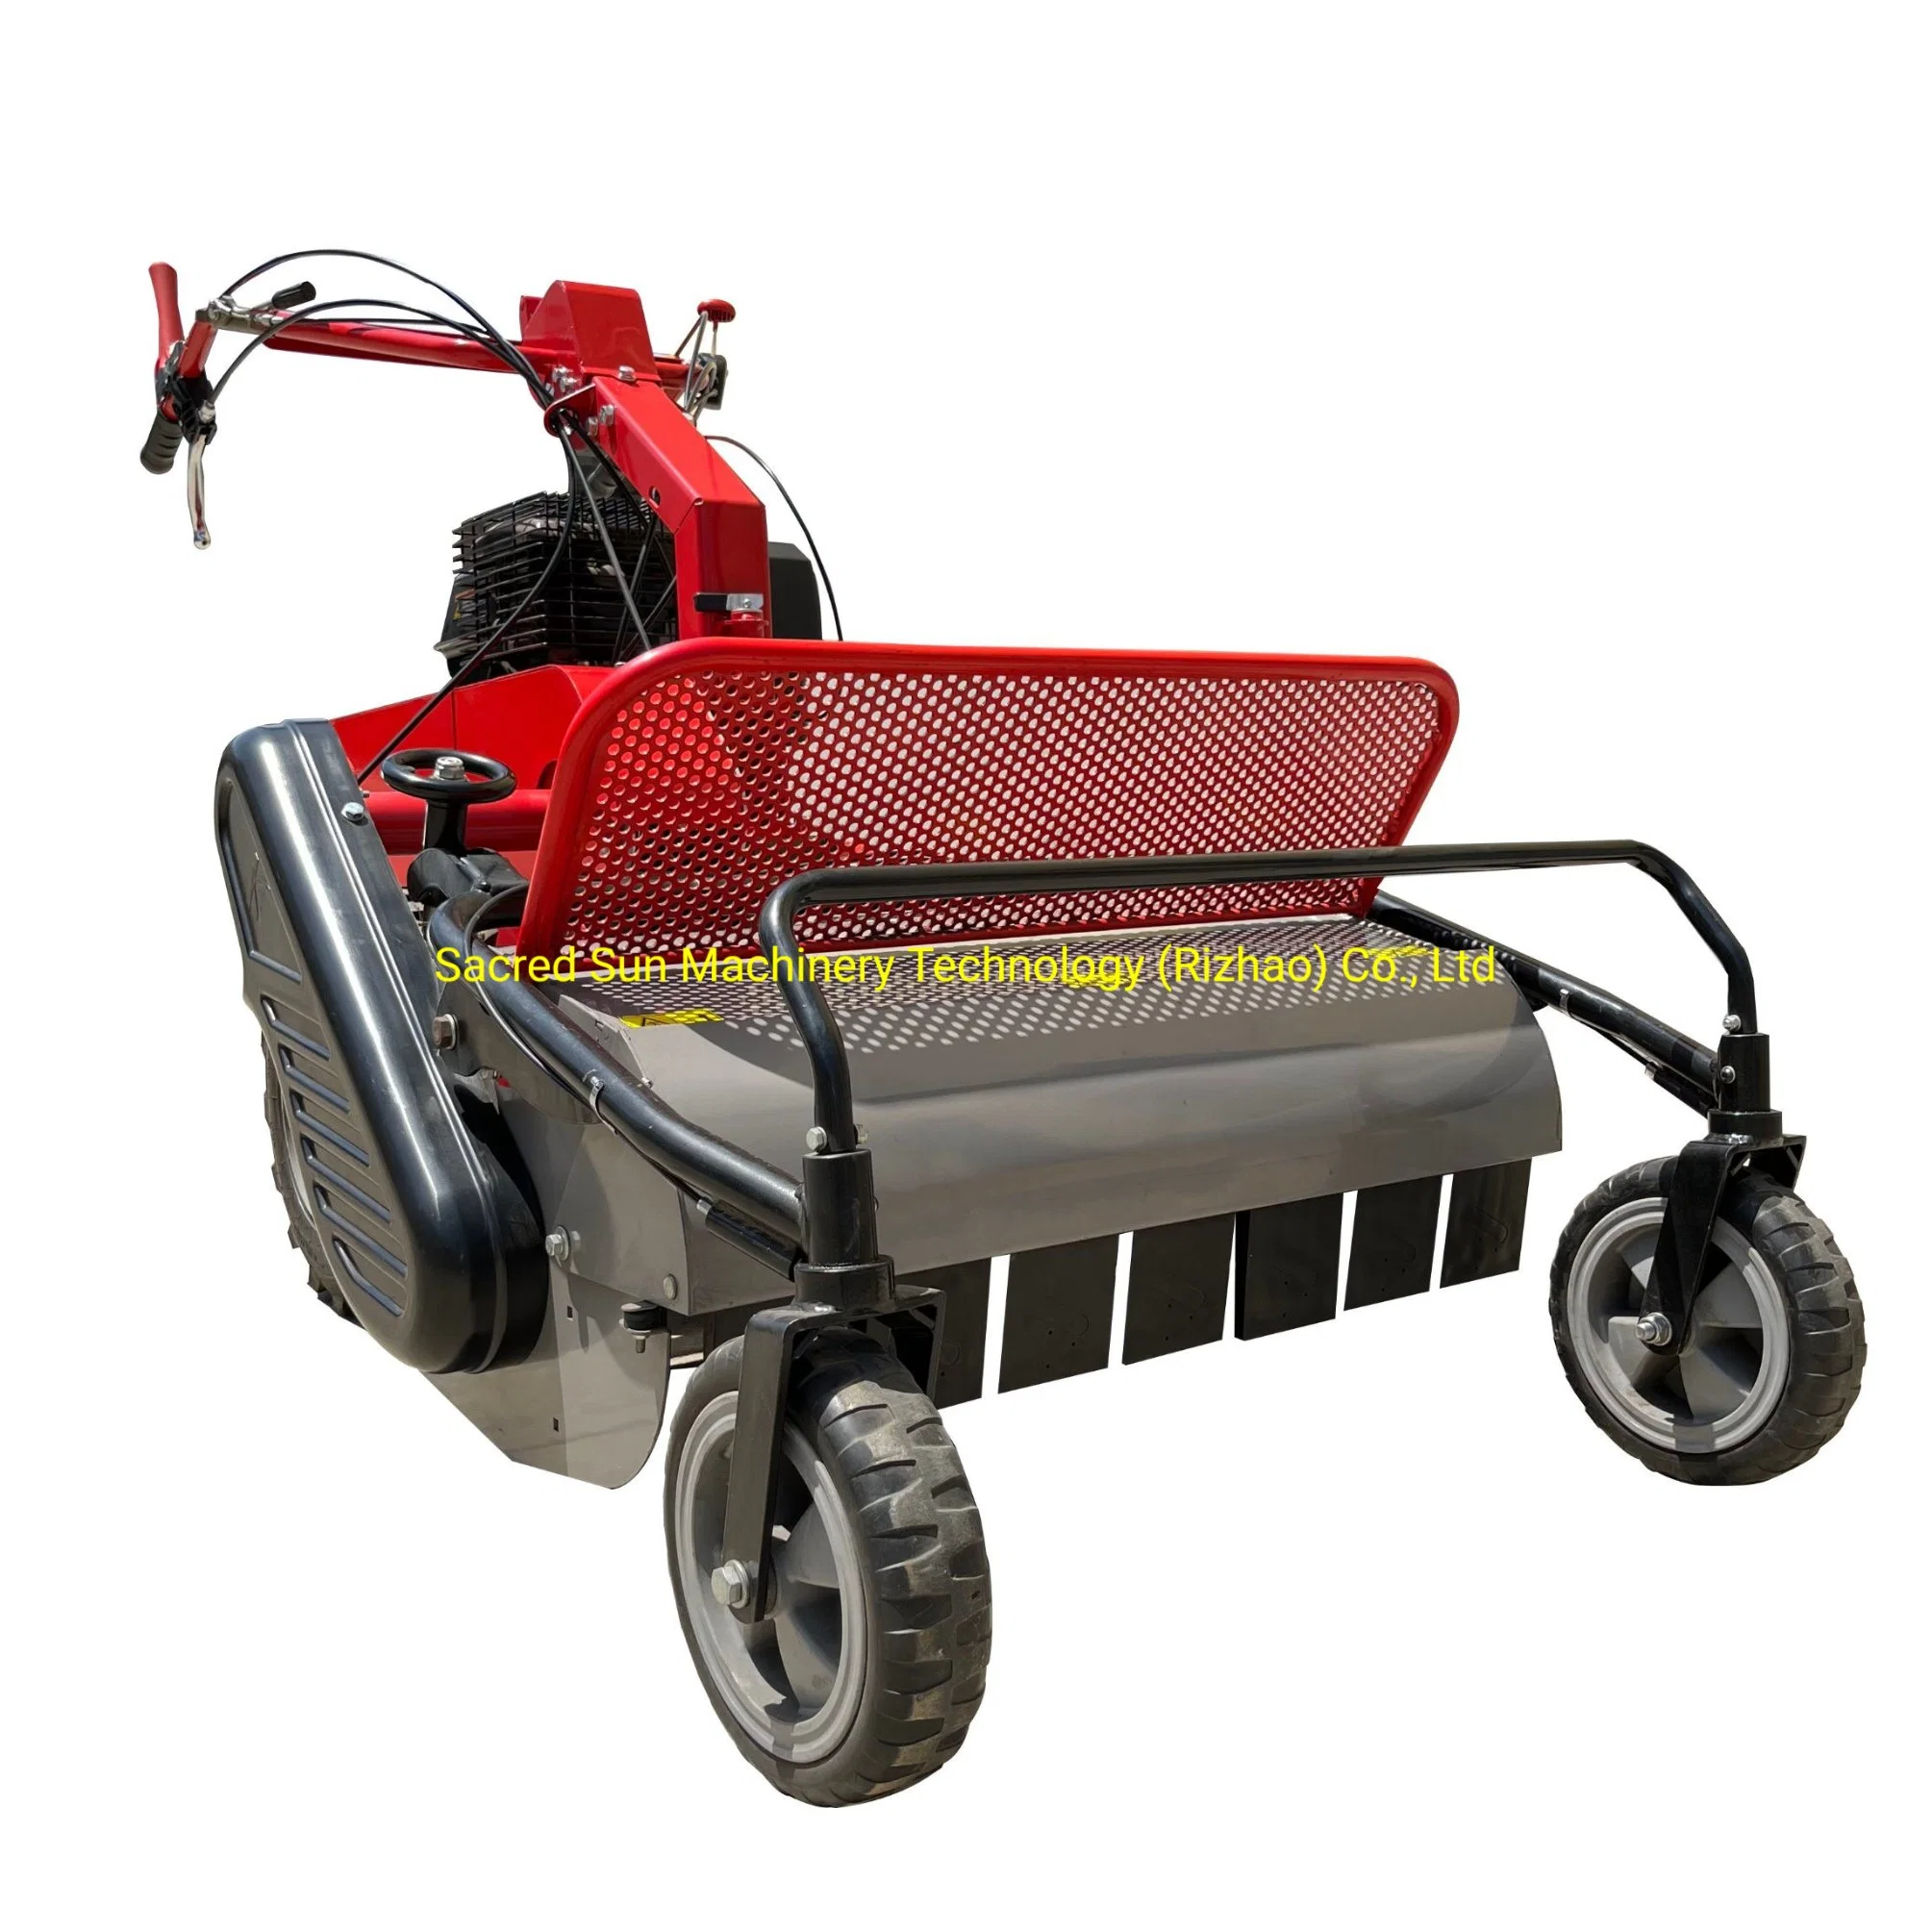 Self-Propelled Flail Lawn Mower Cutter 8HP 13HP Gasoline Engine